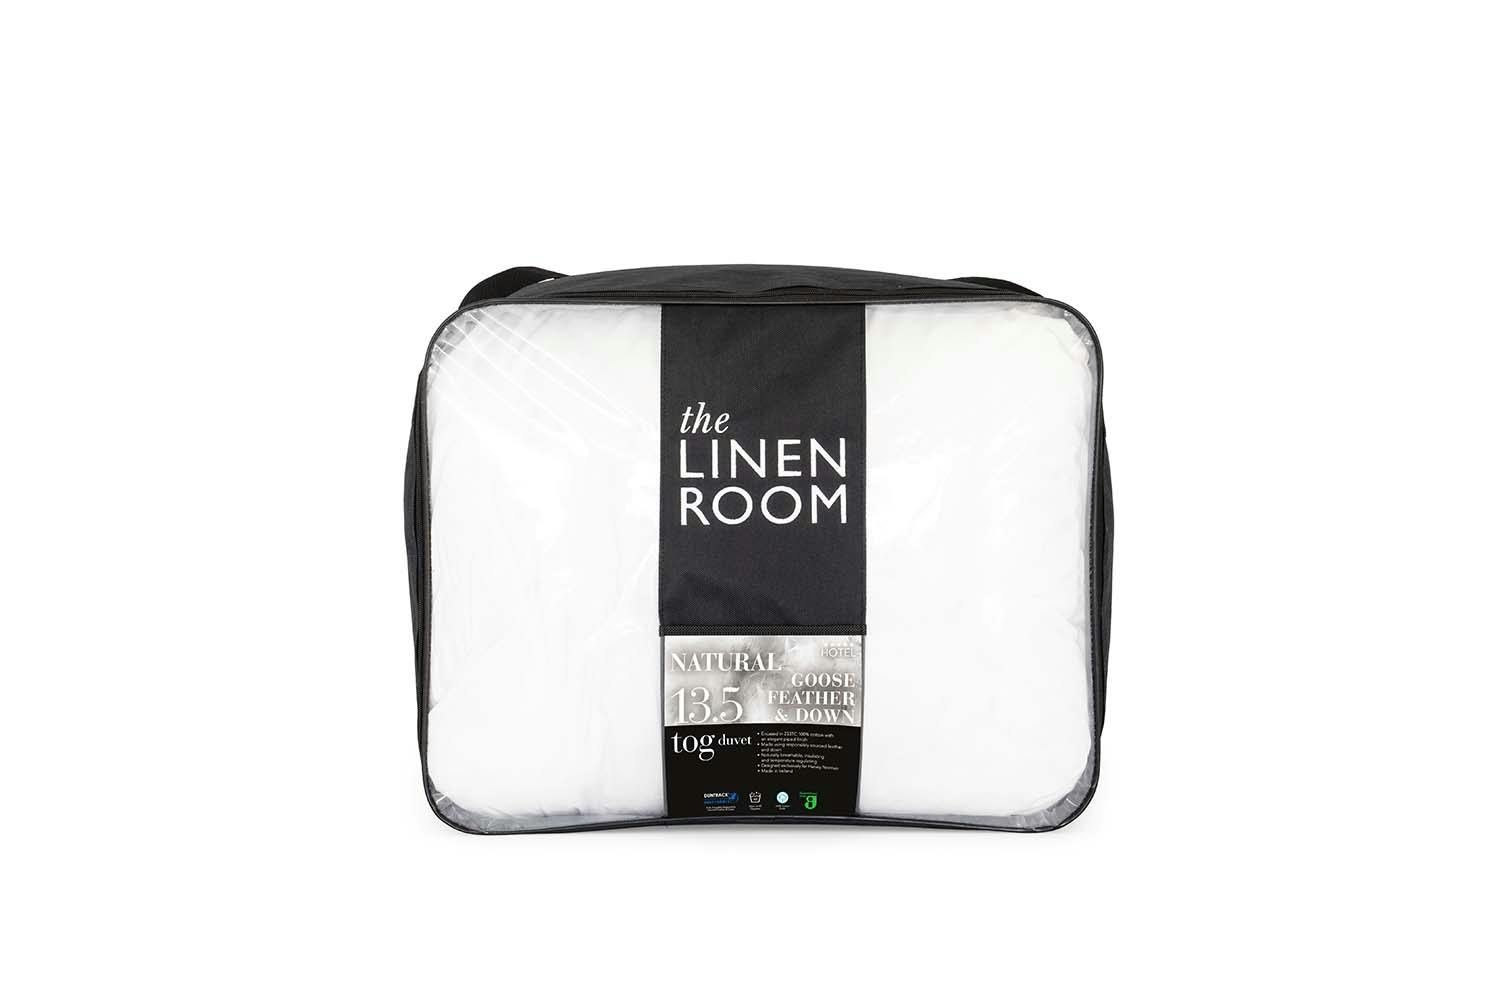 The Linen Room | Natural Goose Feather & Down 13.5 Tog Duvet | Single